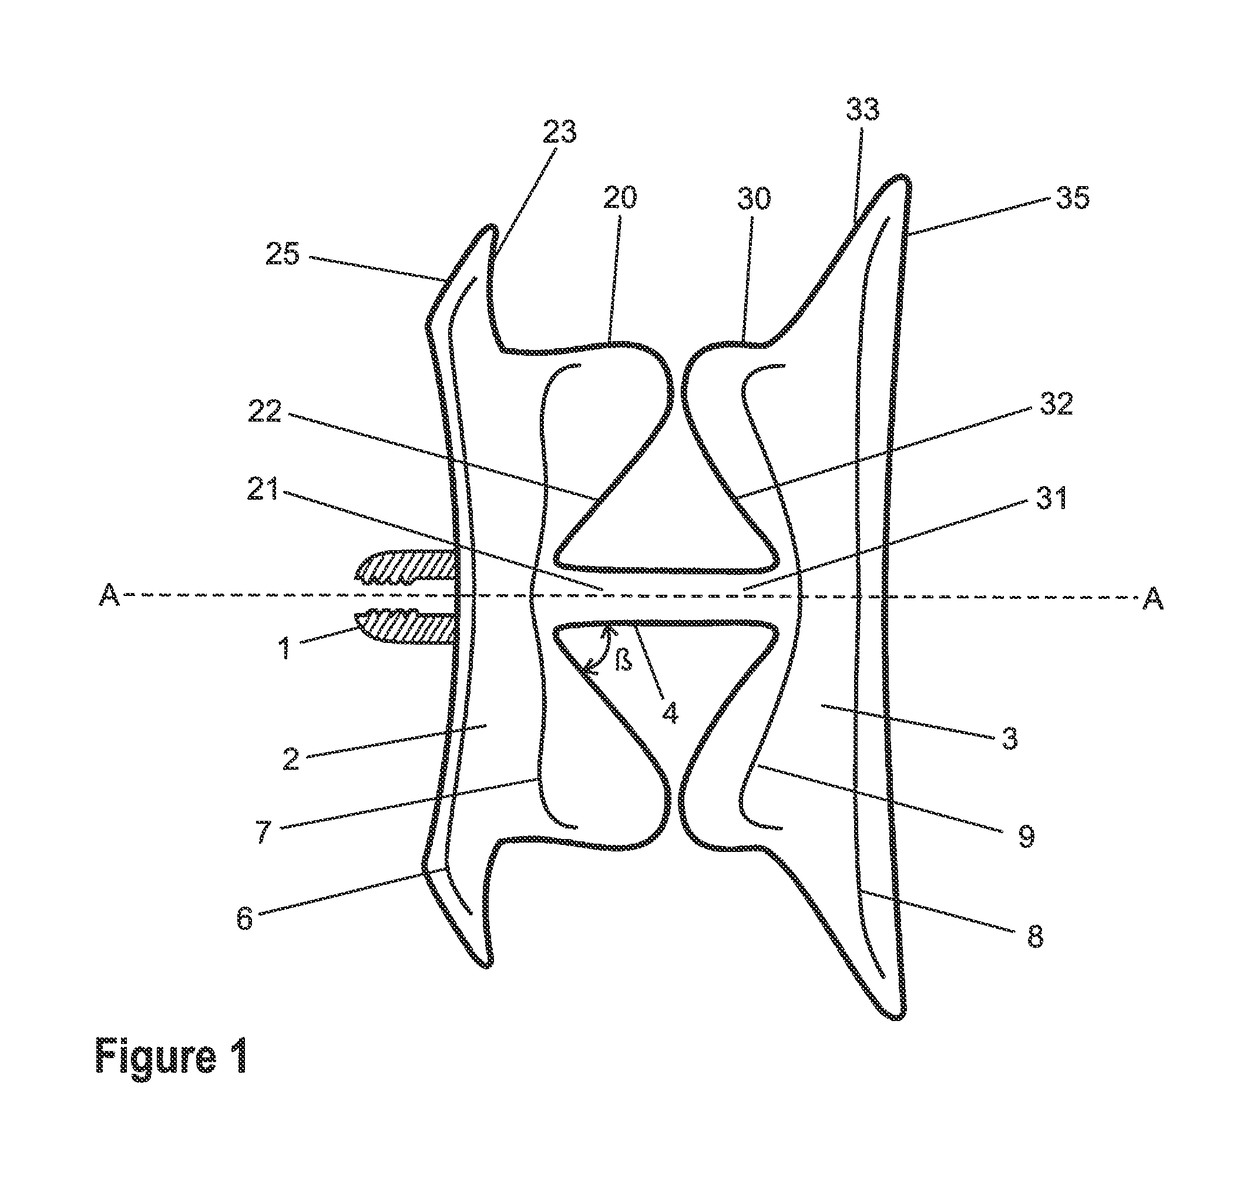 Occlusion device for closing an apical hole in the heart wall